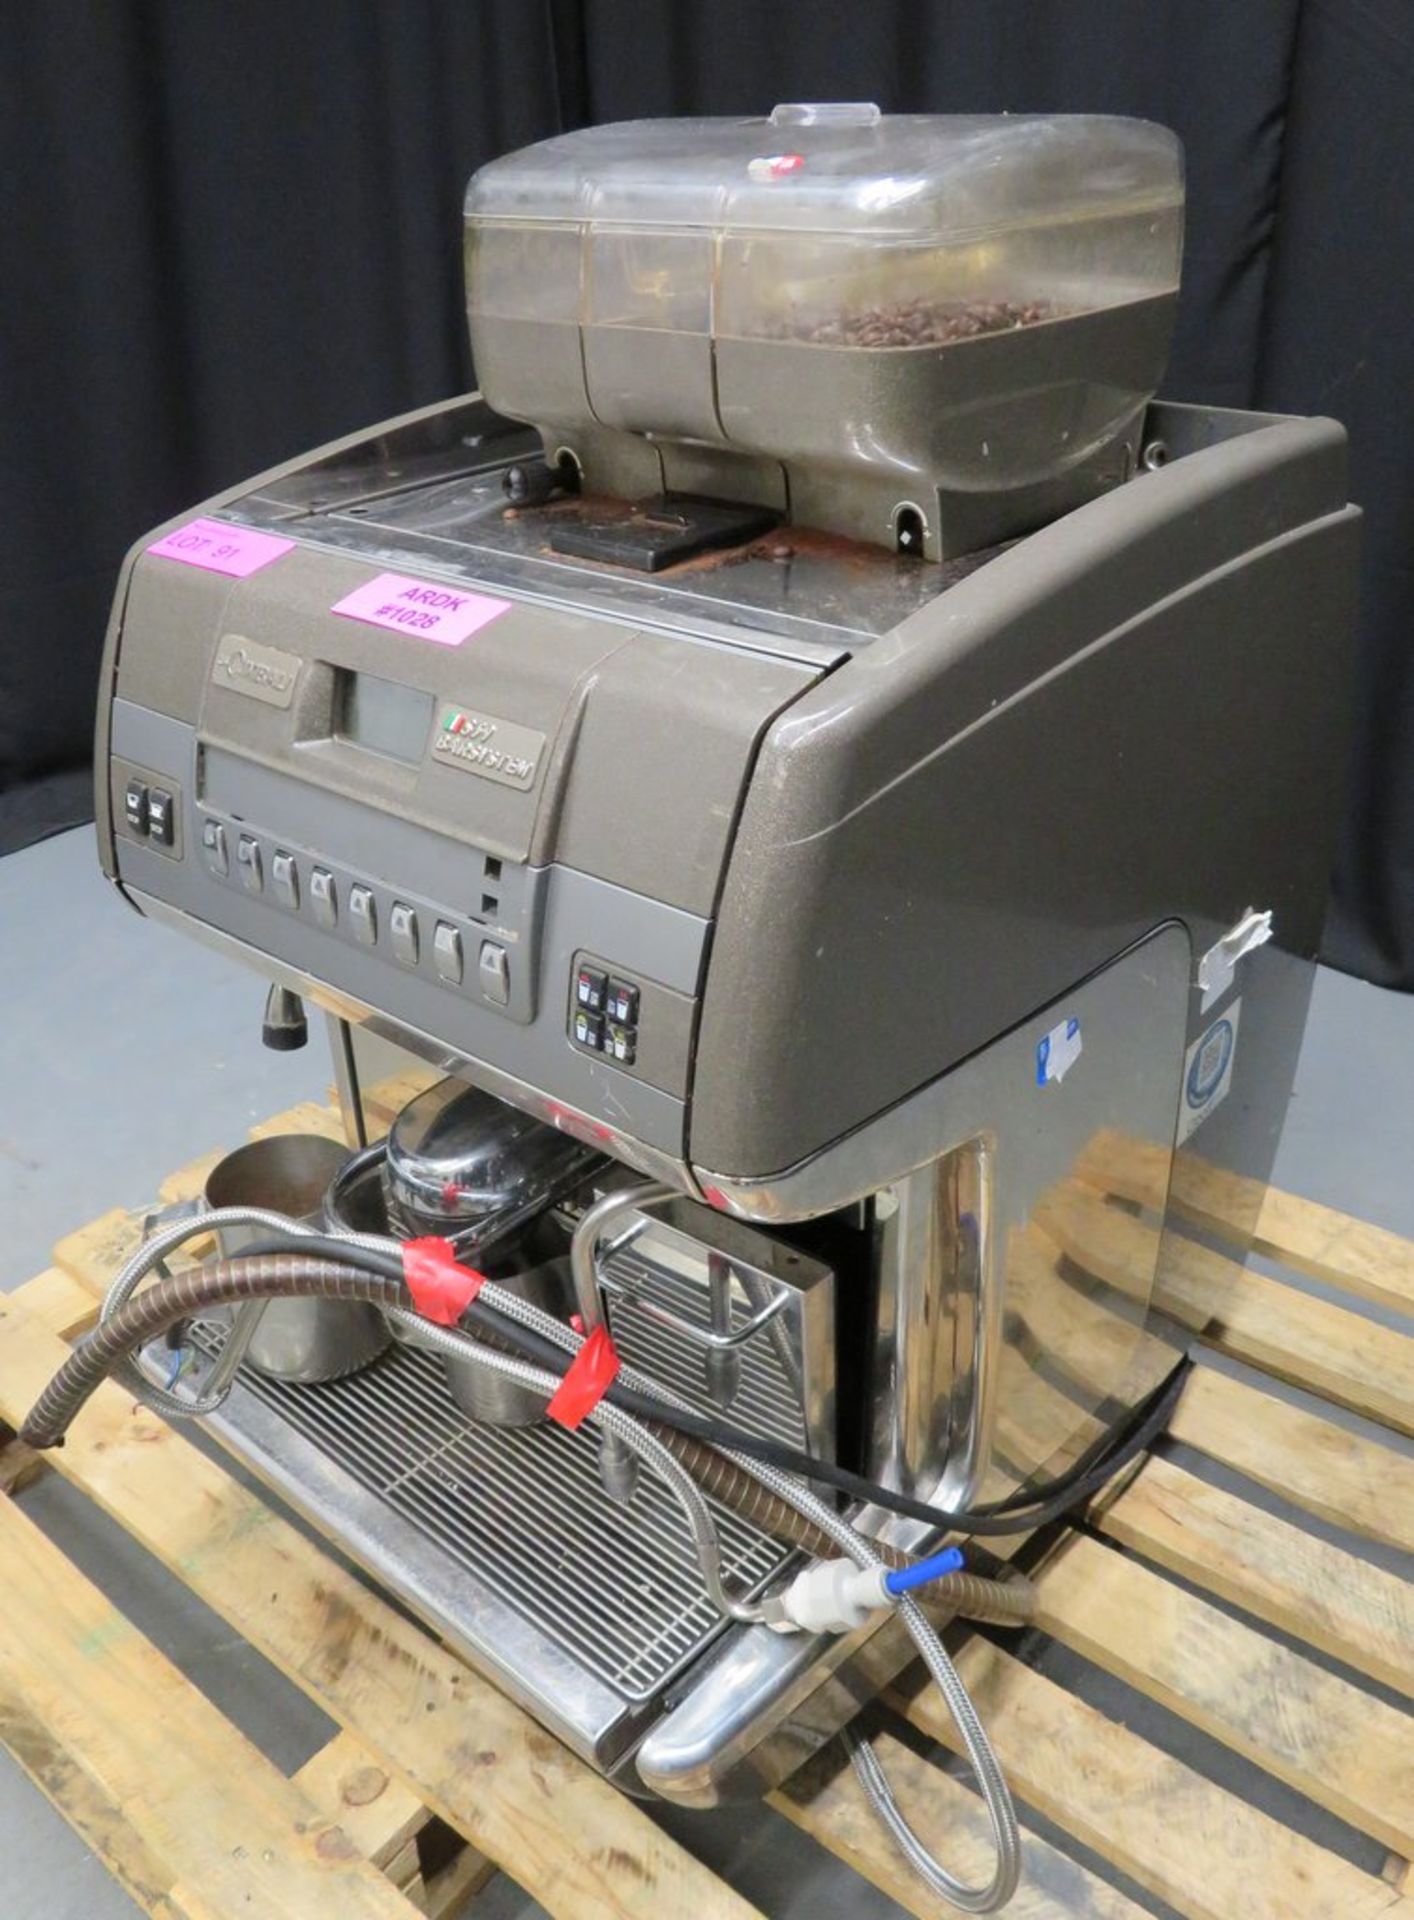 La Cimbali S39 Barsystem commercial bean to cup coffee machine, 1 phase electric - Image 3 of 10